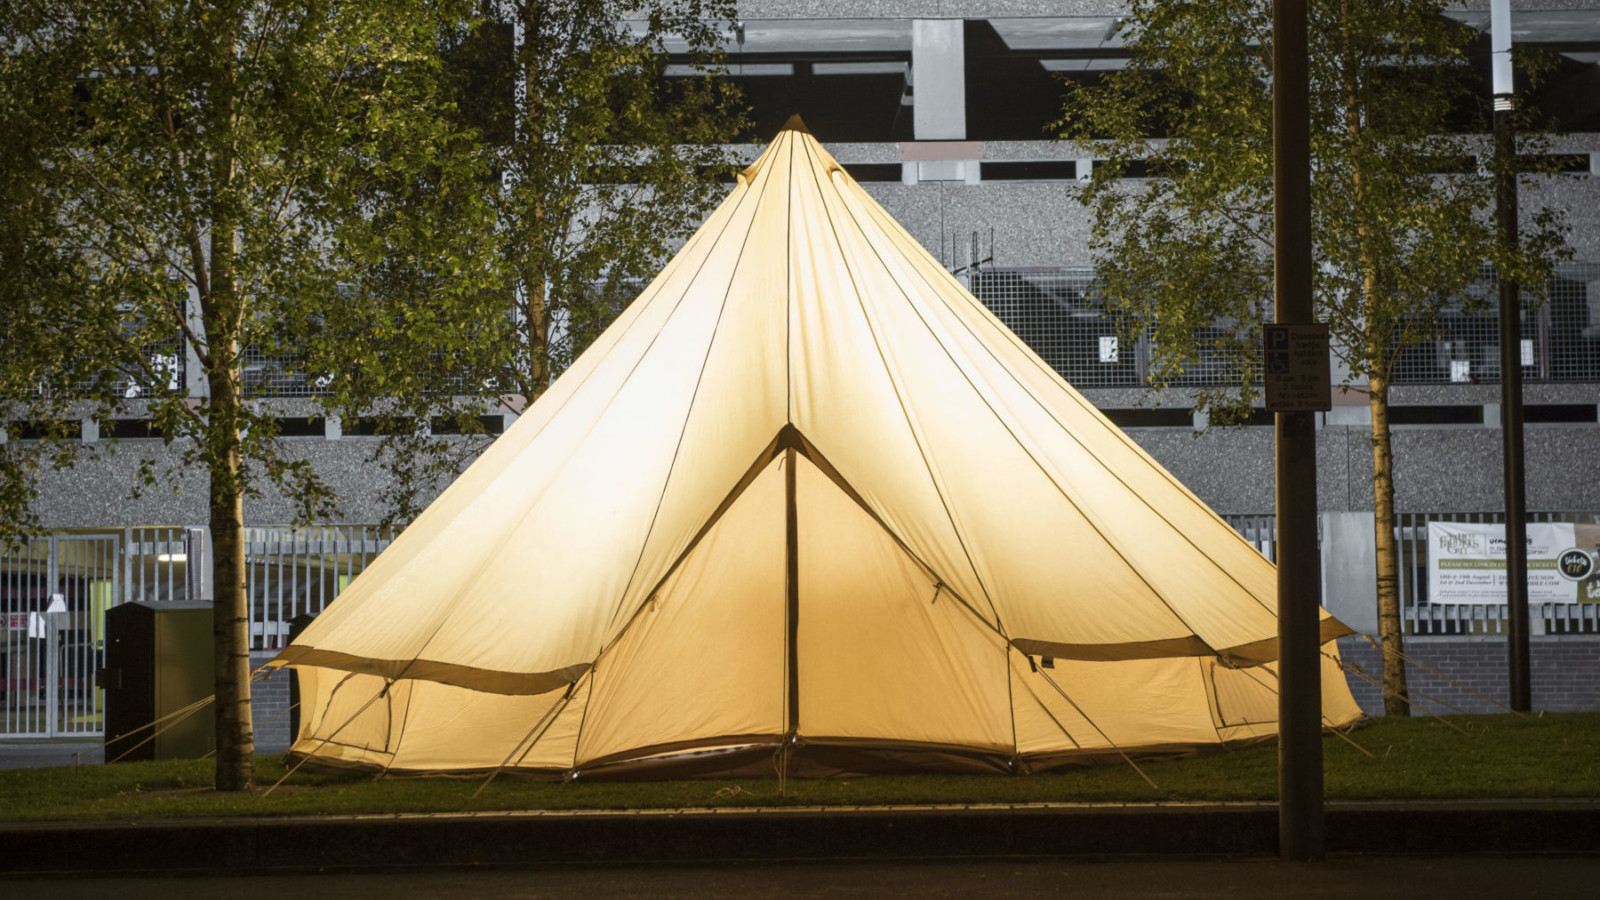 |A bell tent with a light inside stands between trees in front of a multi-storey carpark|A bell tent with a light inside stands between trees in front of a multi-storey carpark|